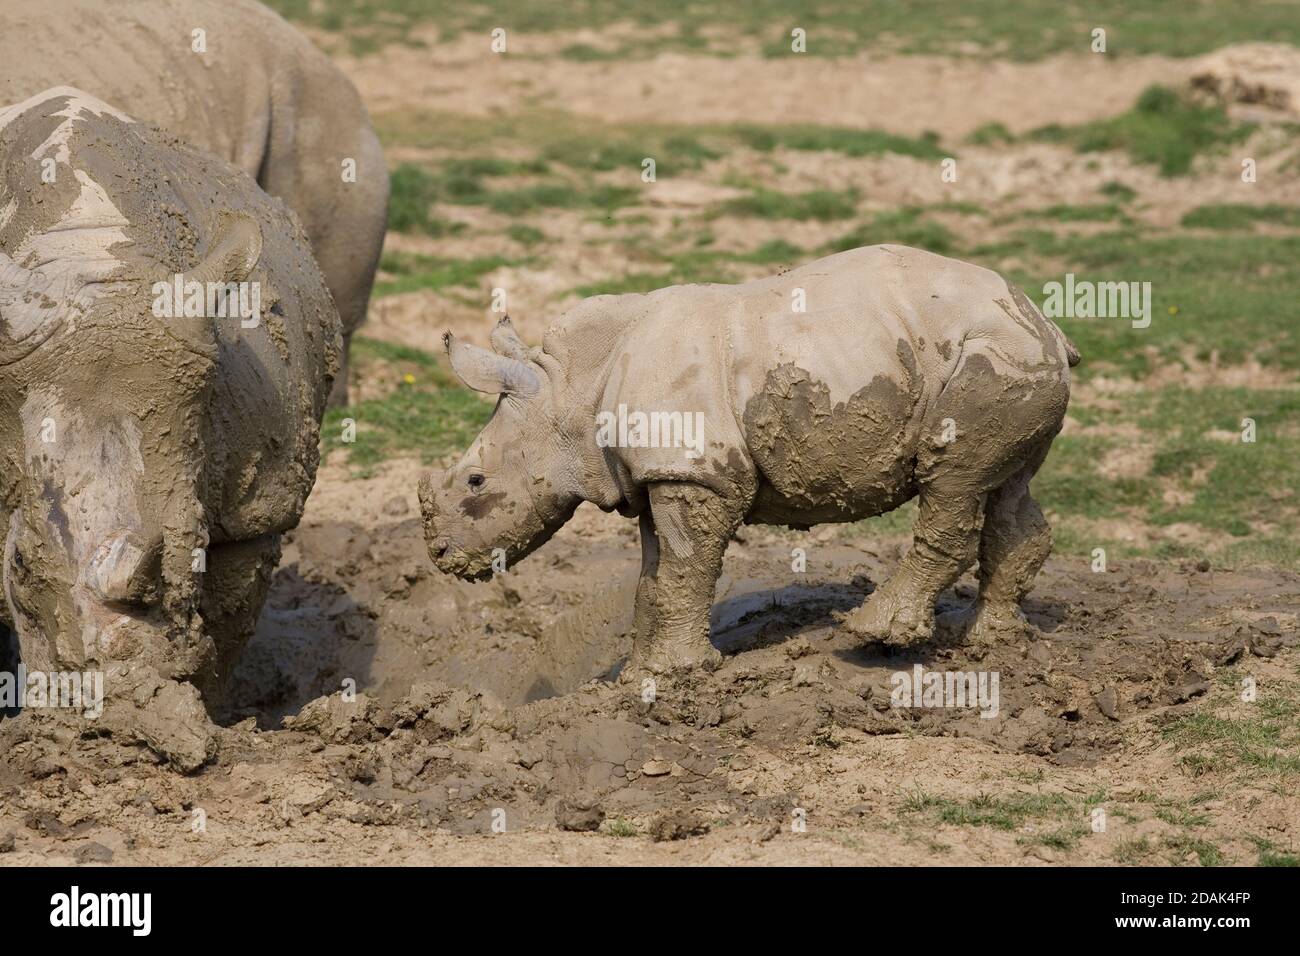 Rhino calf and adult rhino in mud bath at Cotswold Wildlife park Stock Photo